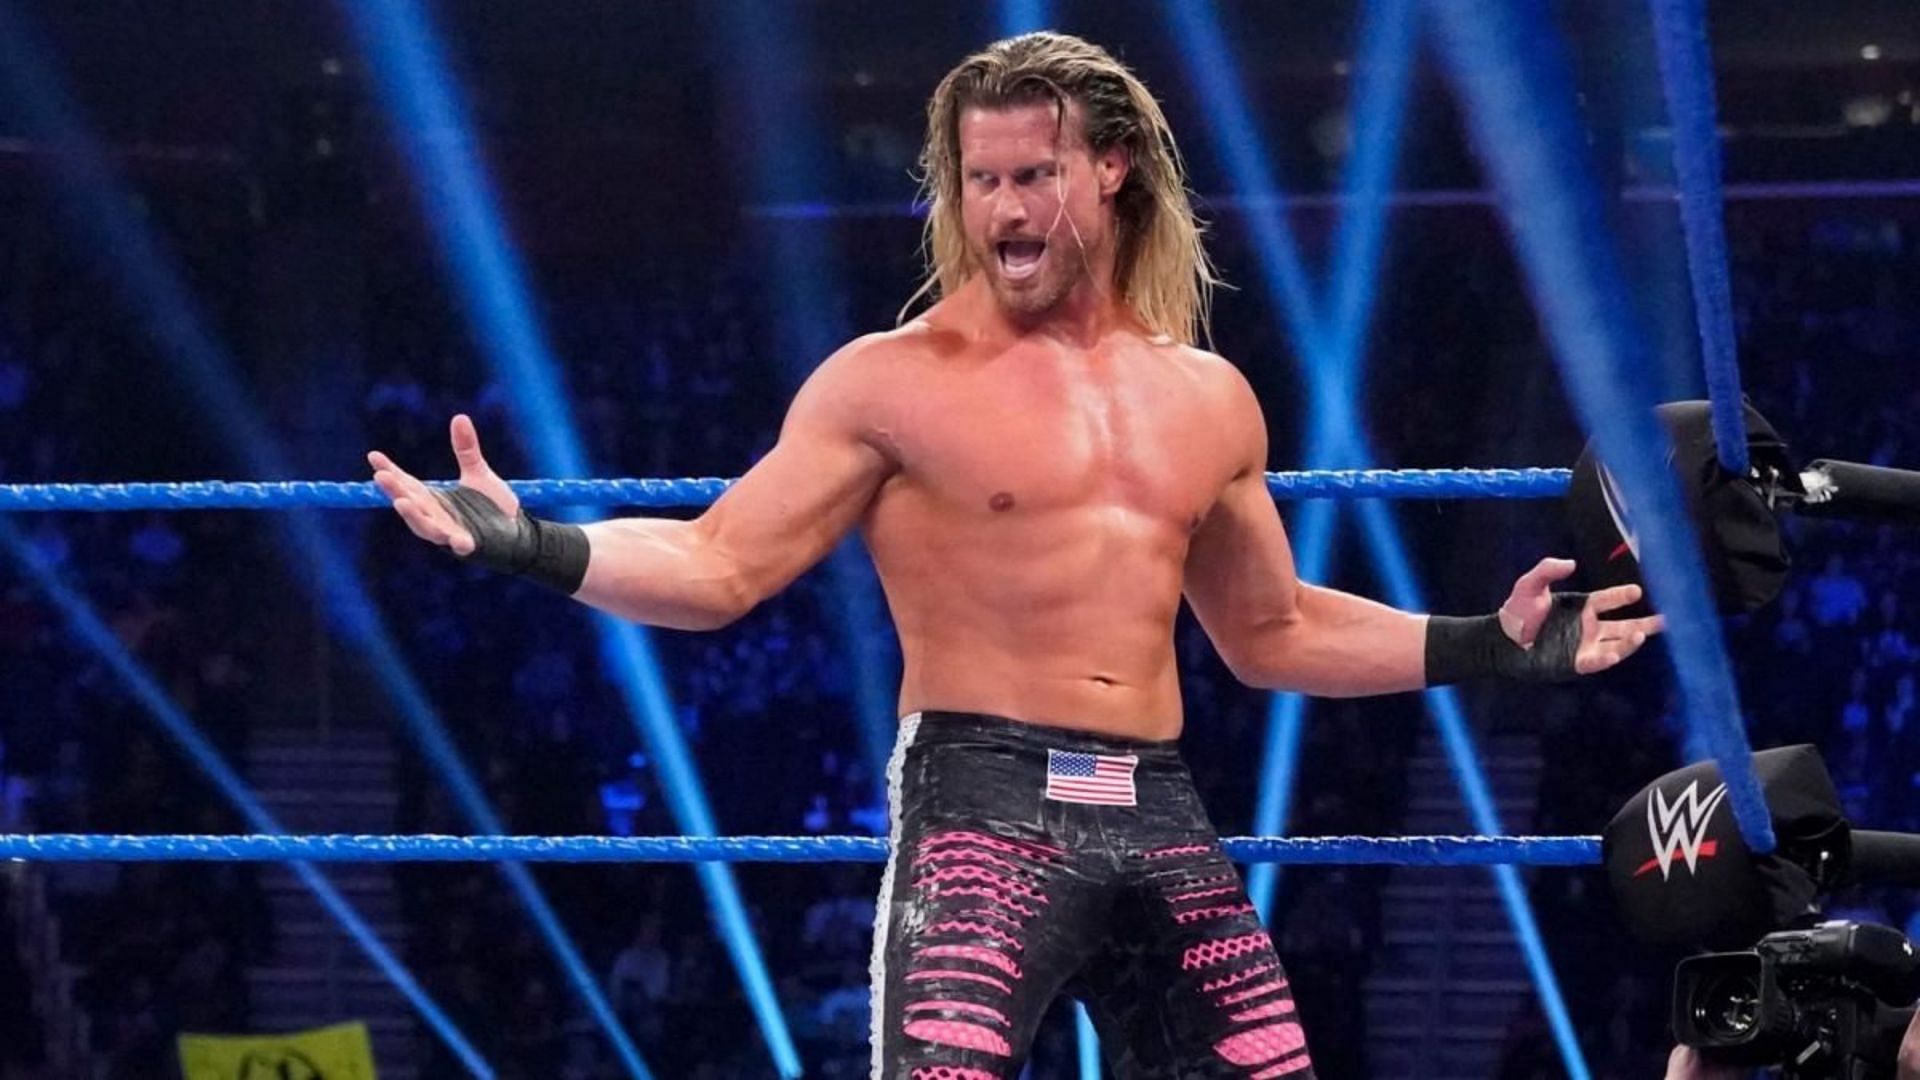 Dolph Ziggler had a fling with Sunny in 2010